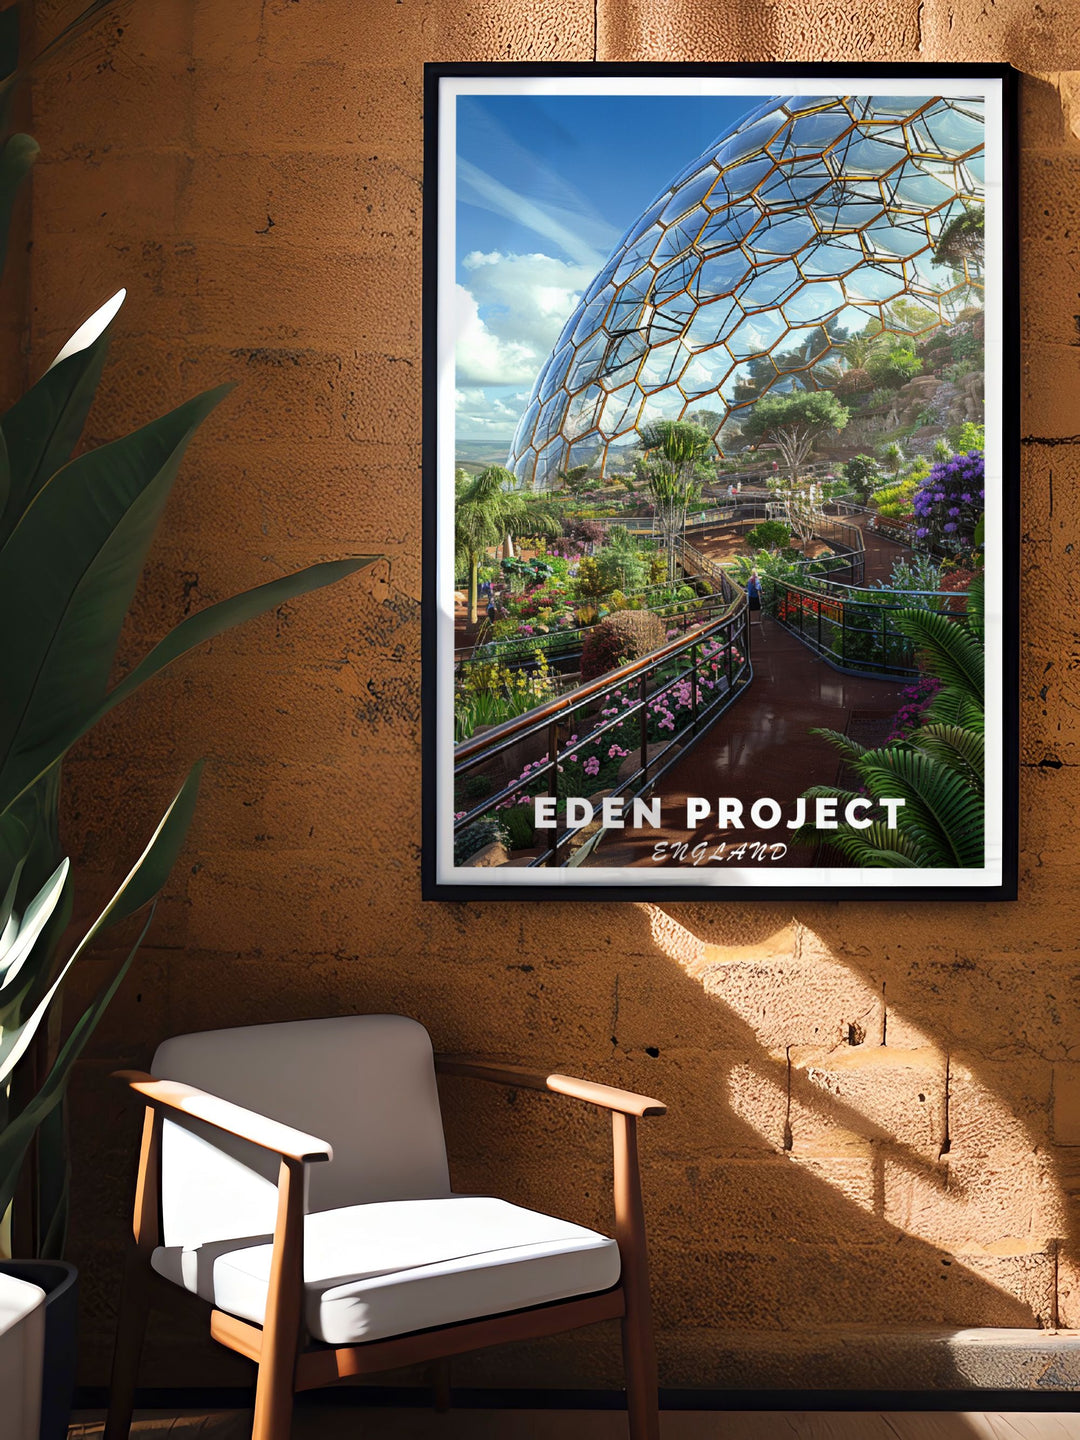 Eden Project vintage print highlighting the historical and botanical significance of this renowned garden an excellent choice for art lovers and nature enthusiasts this piece brings the charm and innovation of the Eden Project to your walls.